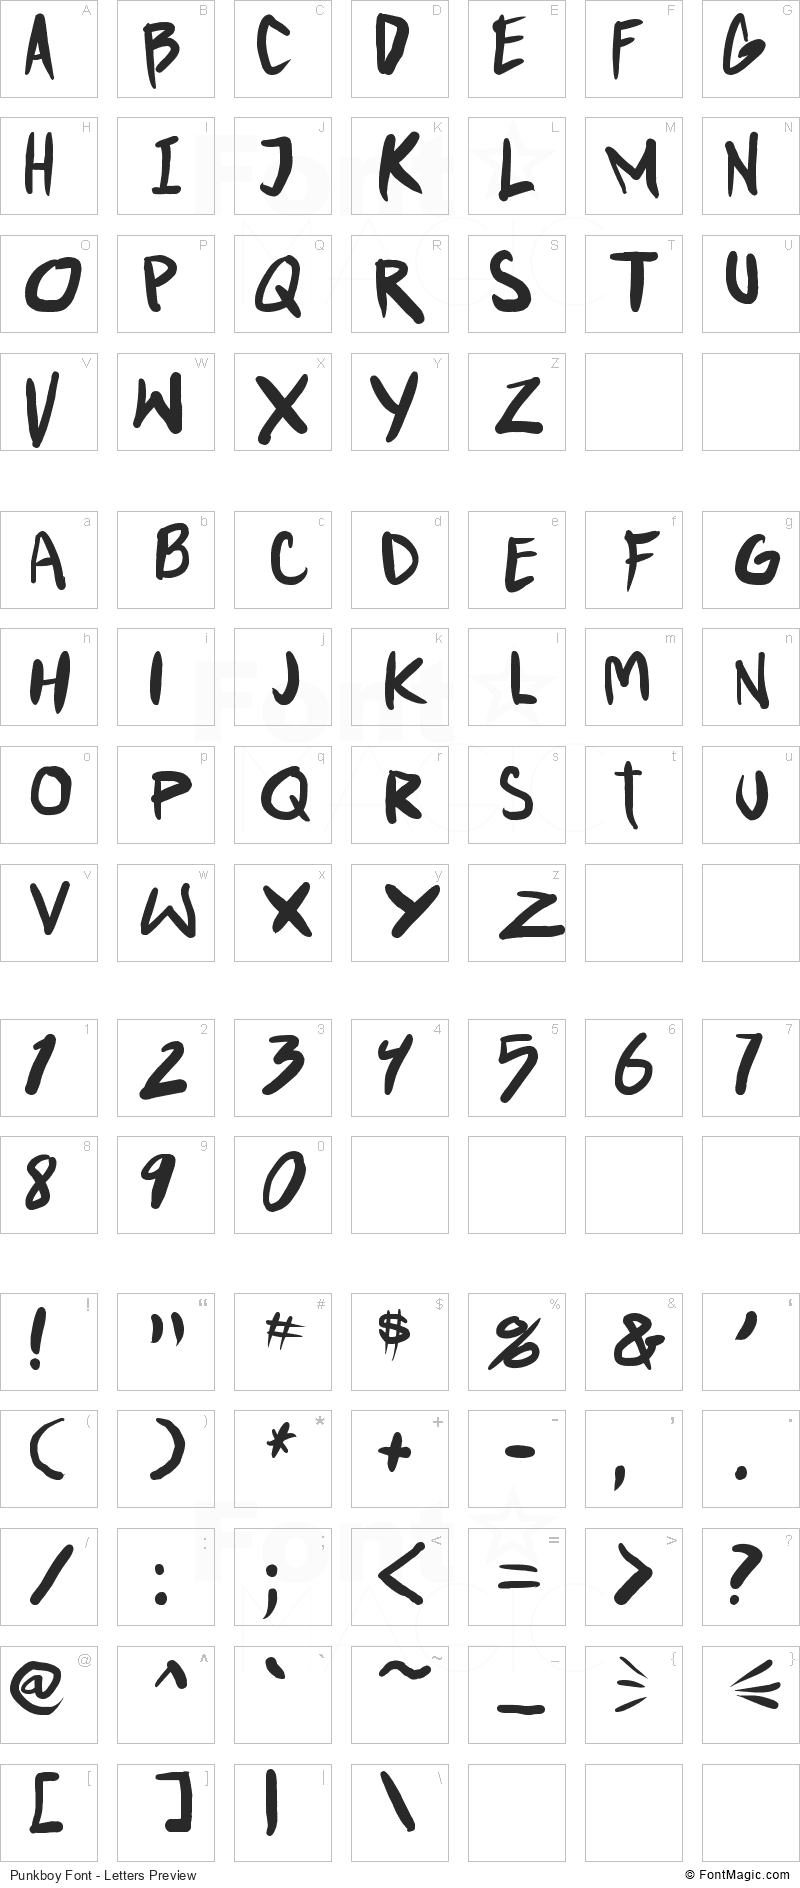 Punkboy Font - All Latters Preview Chart